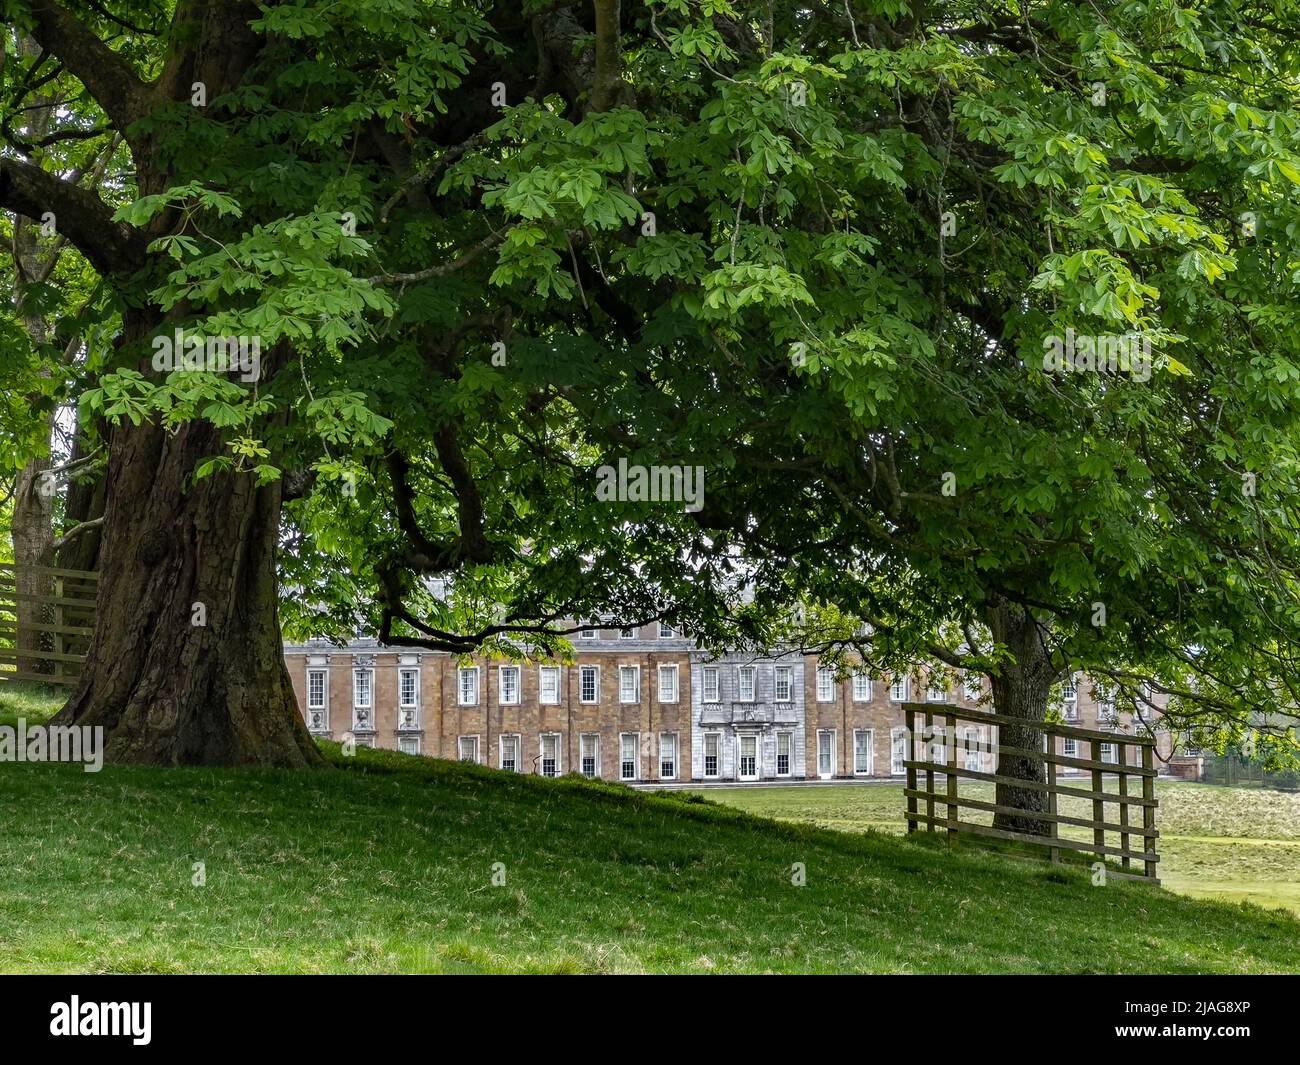 The exterior of Petworth House in West Sussex, United Kingdom.  Petworth is a late 17th-century Grade I listed country house, rebuilt in 1688 by Charl Stock Photo